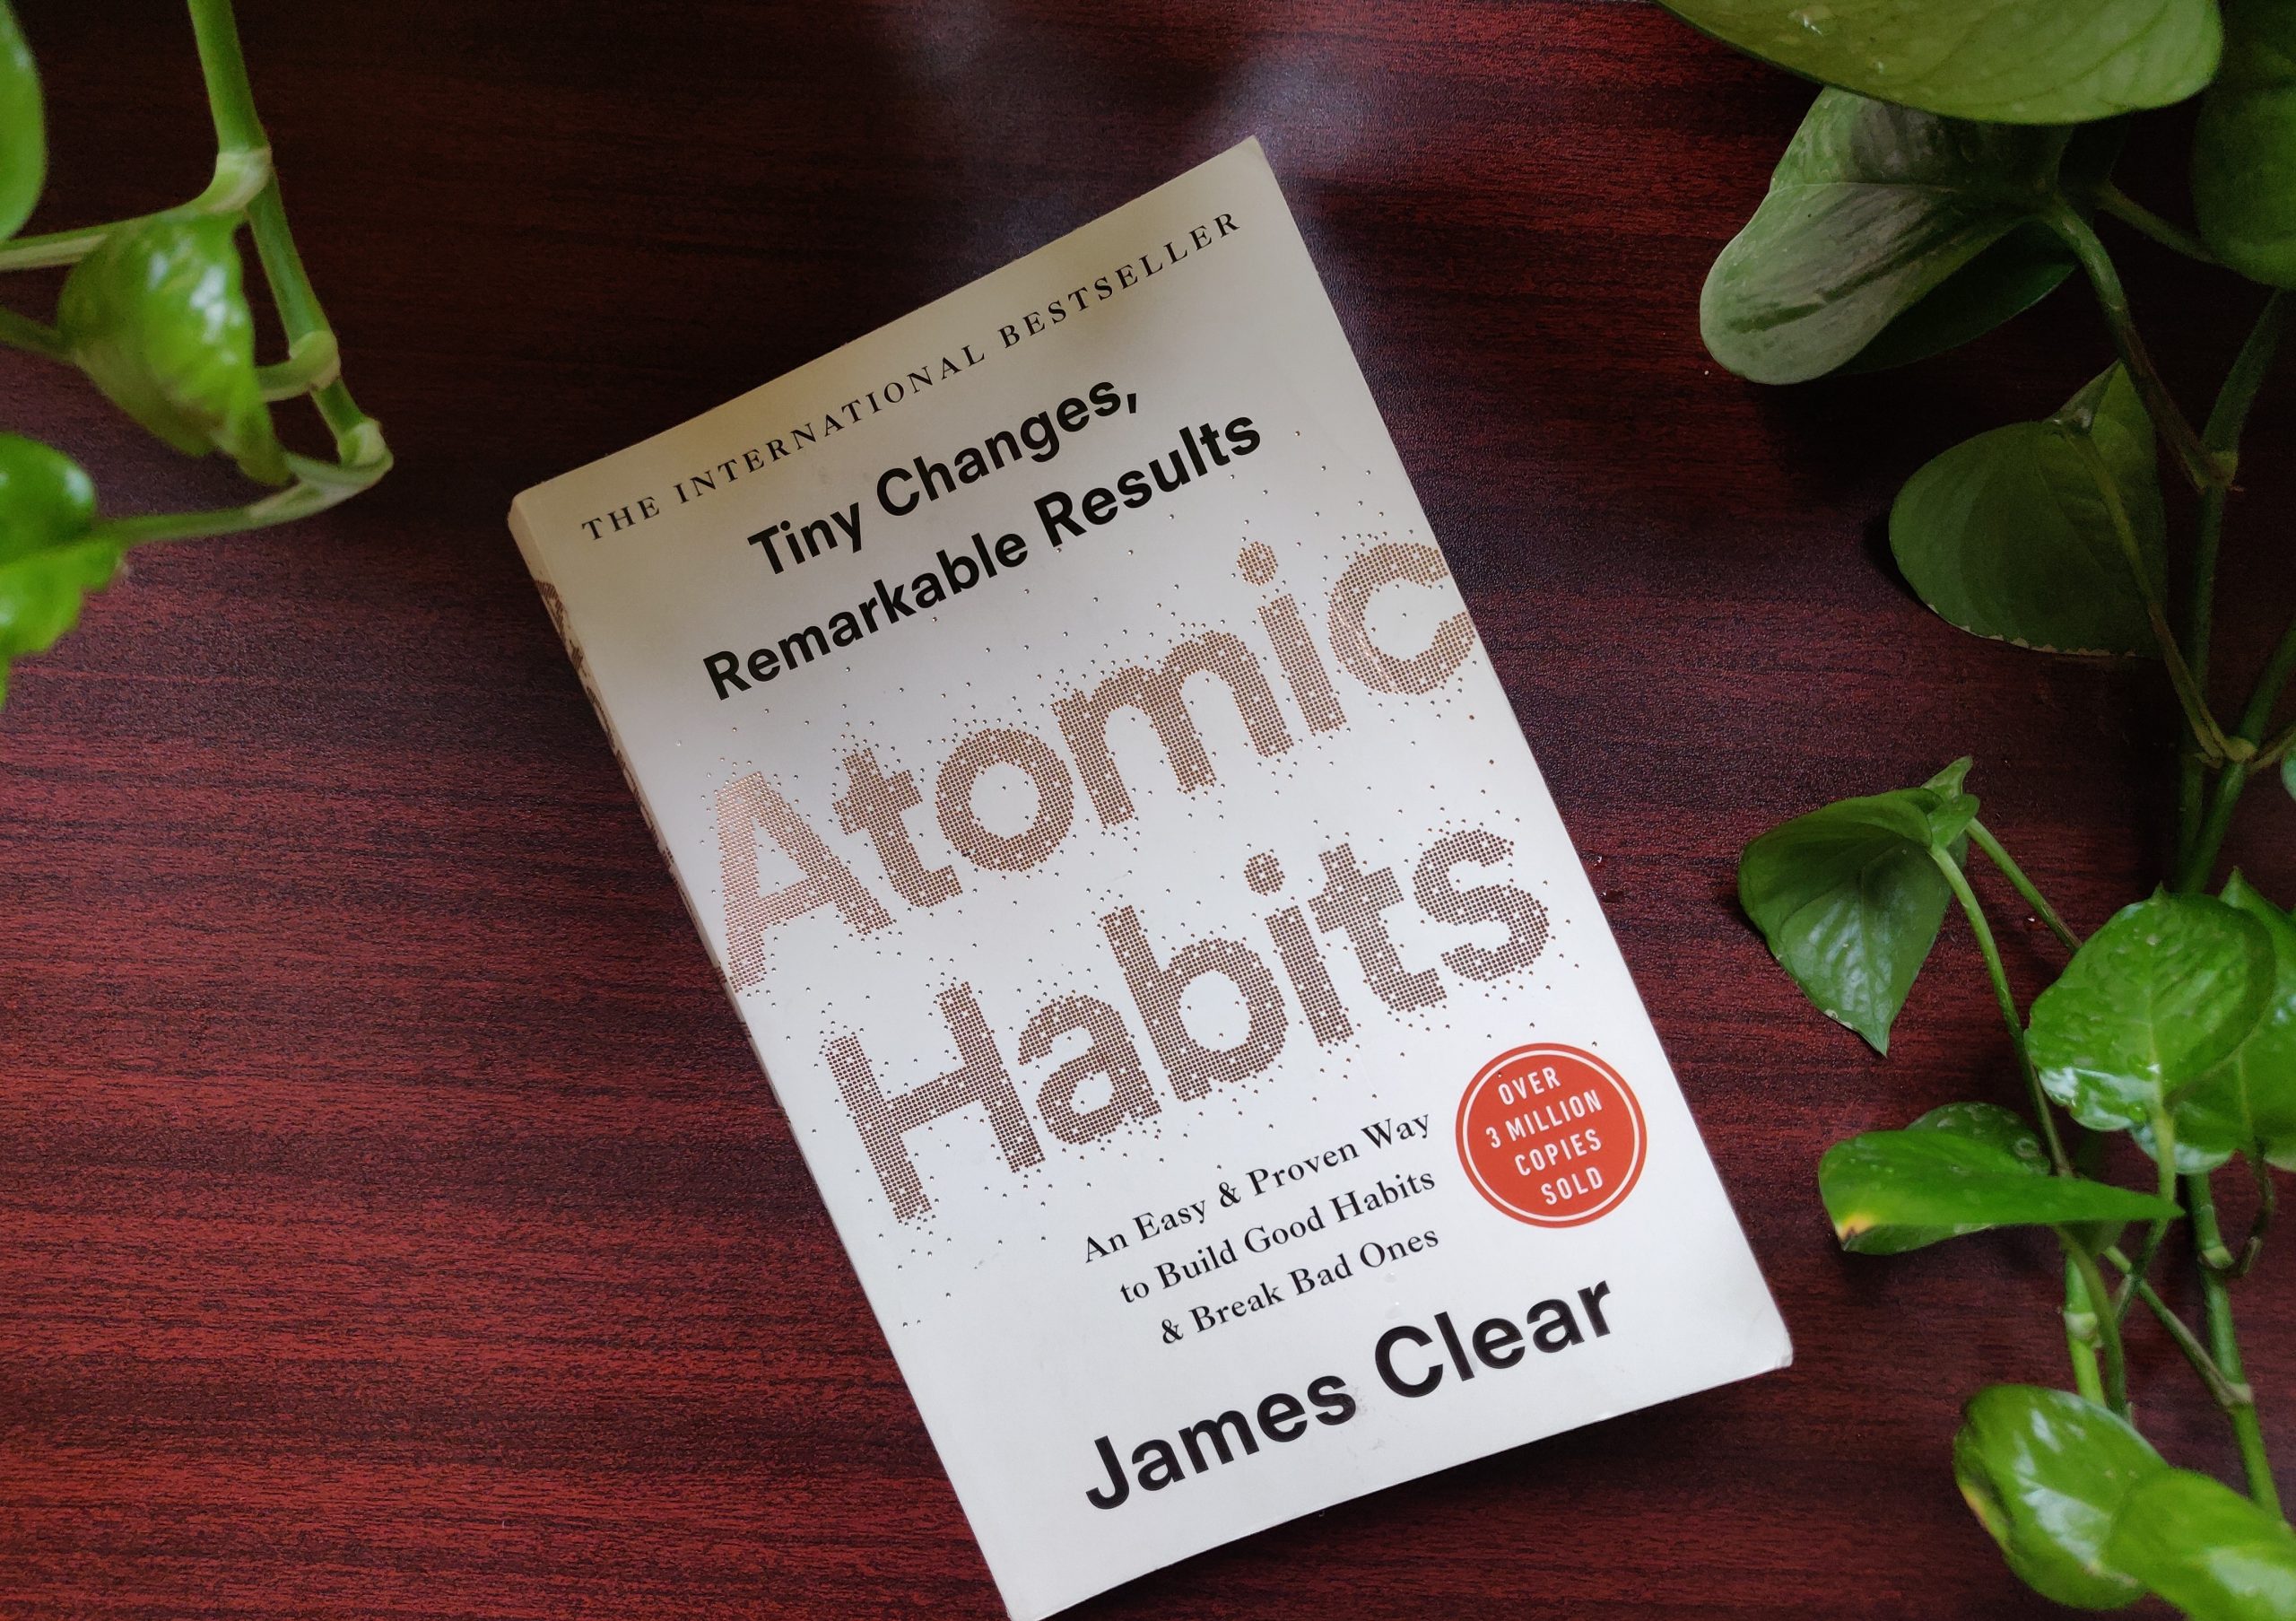 book review of atomic habits